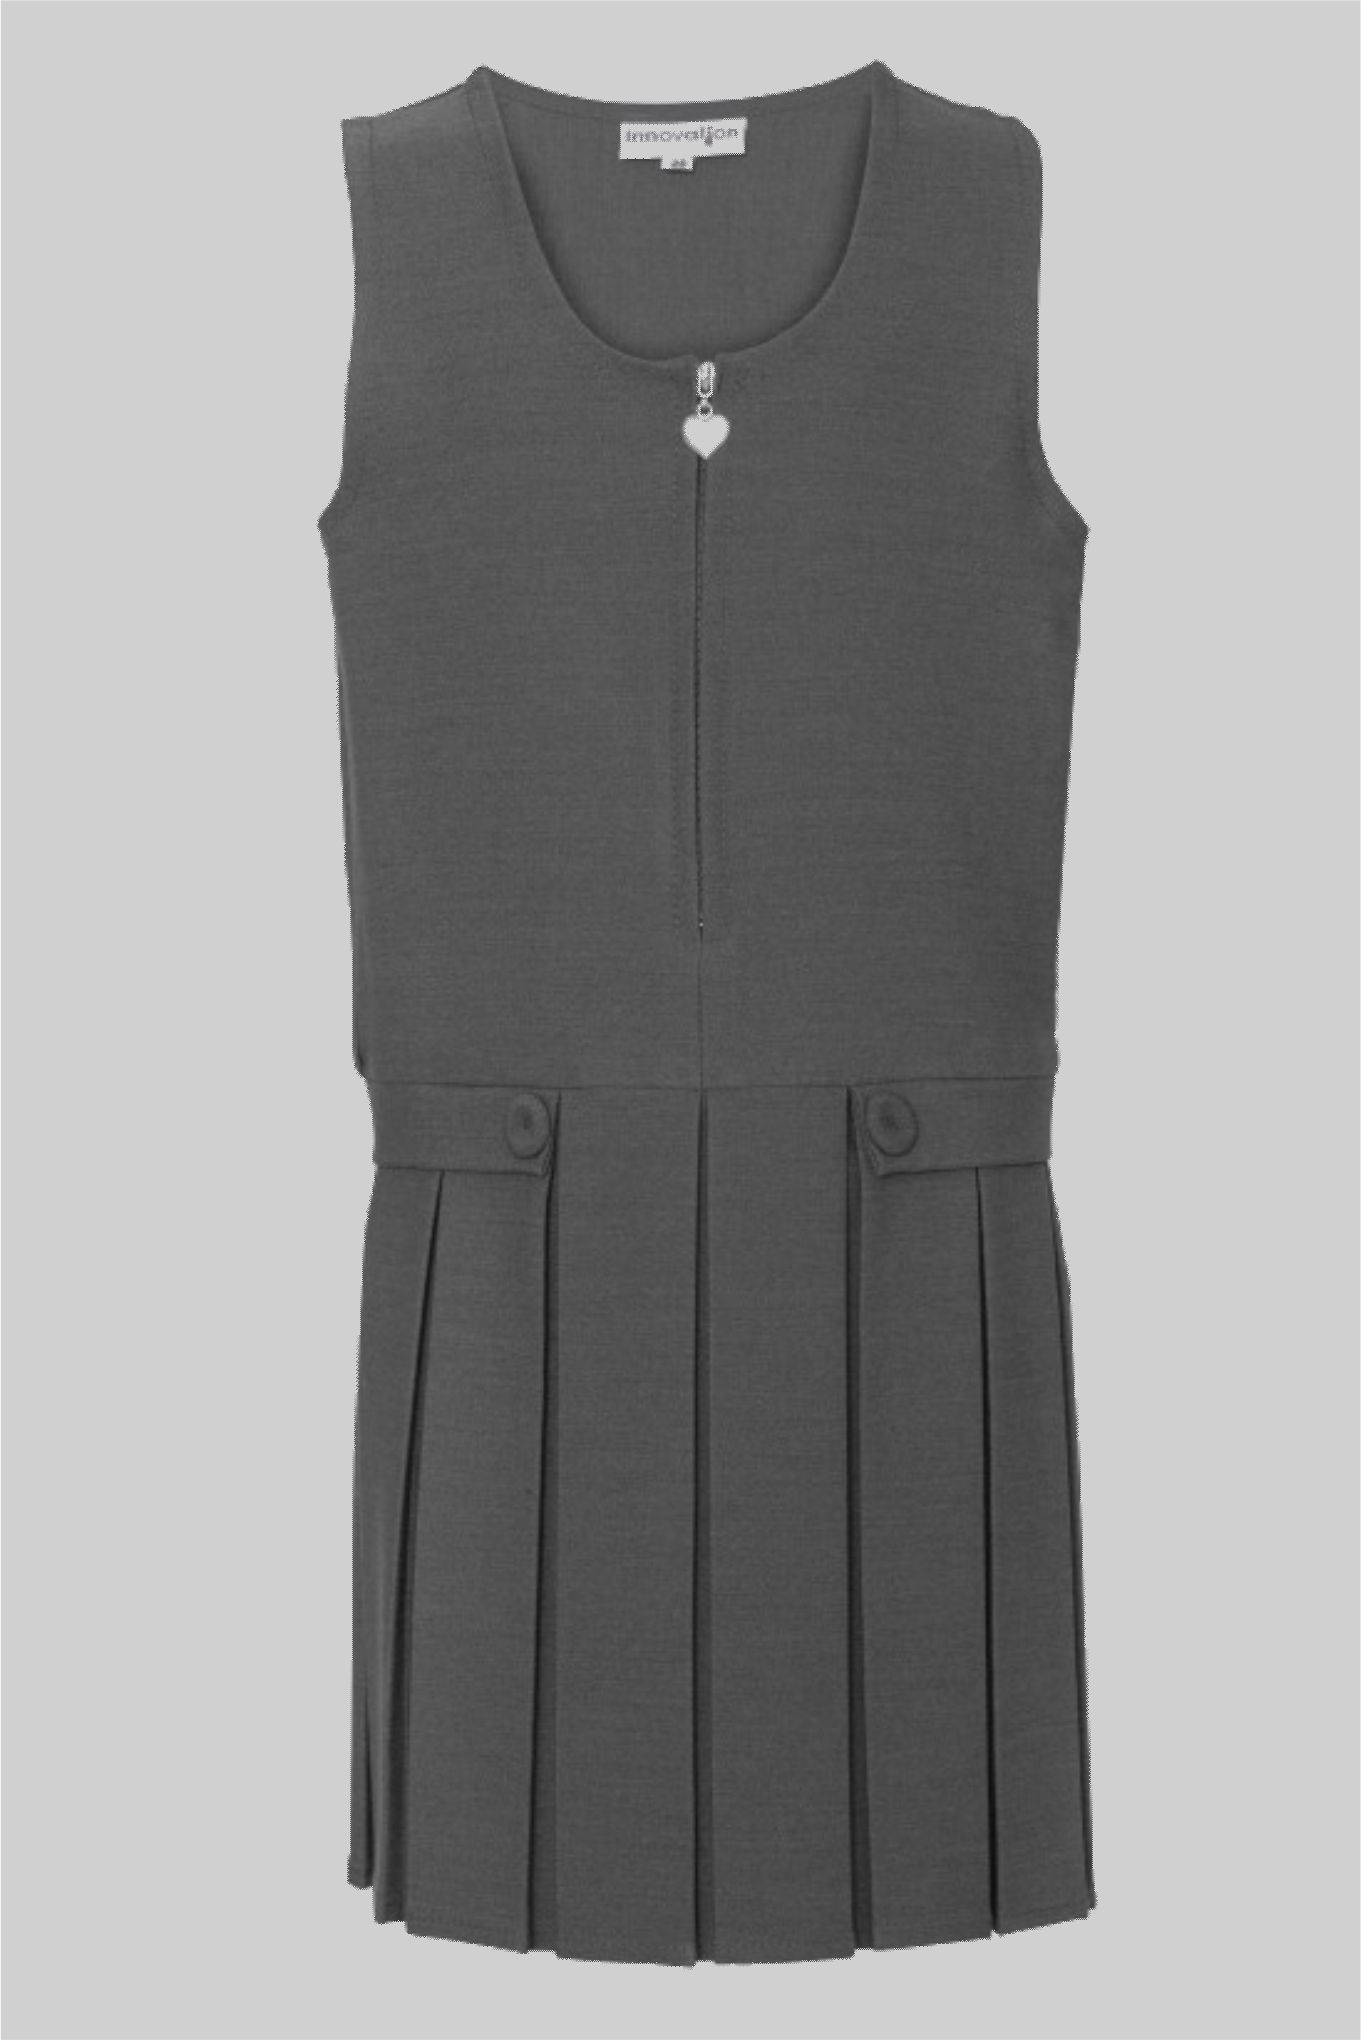 ST Peters Innovation pinafore.jpg